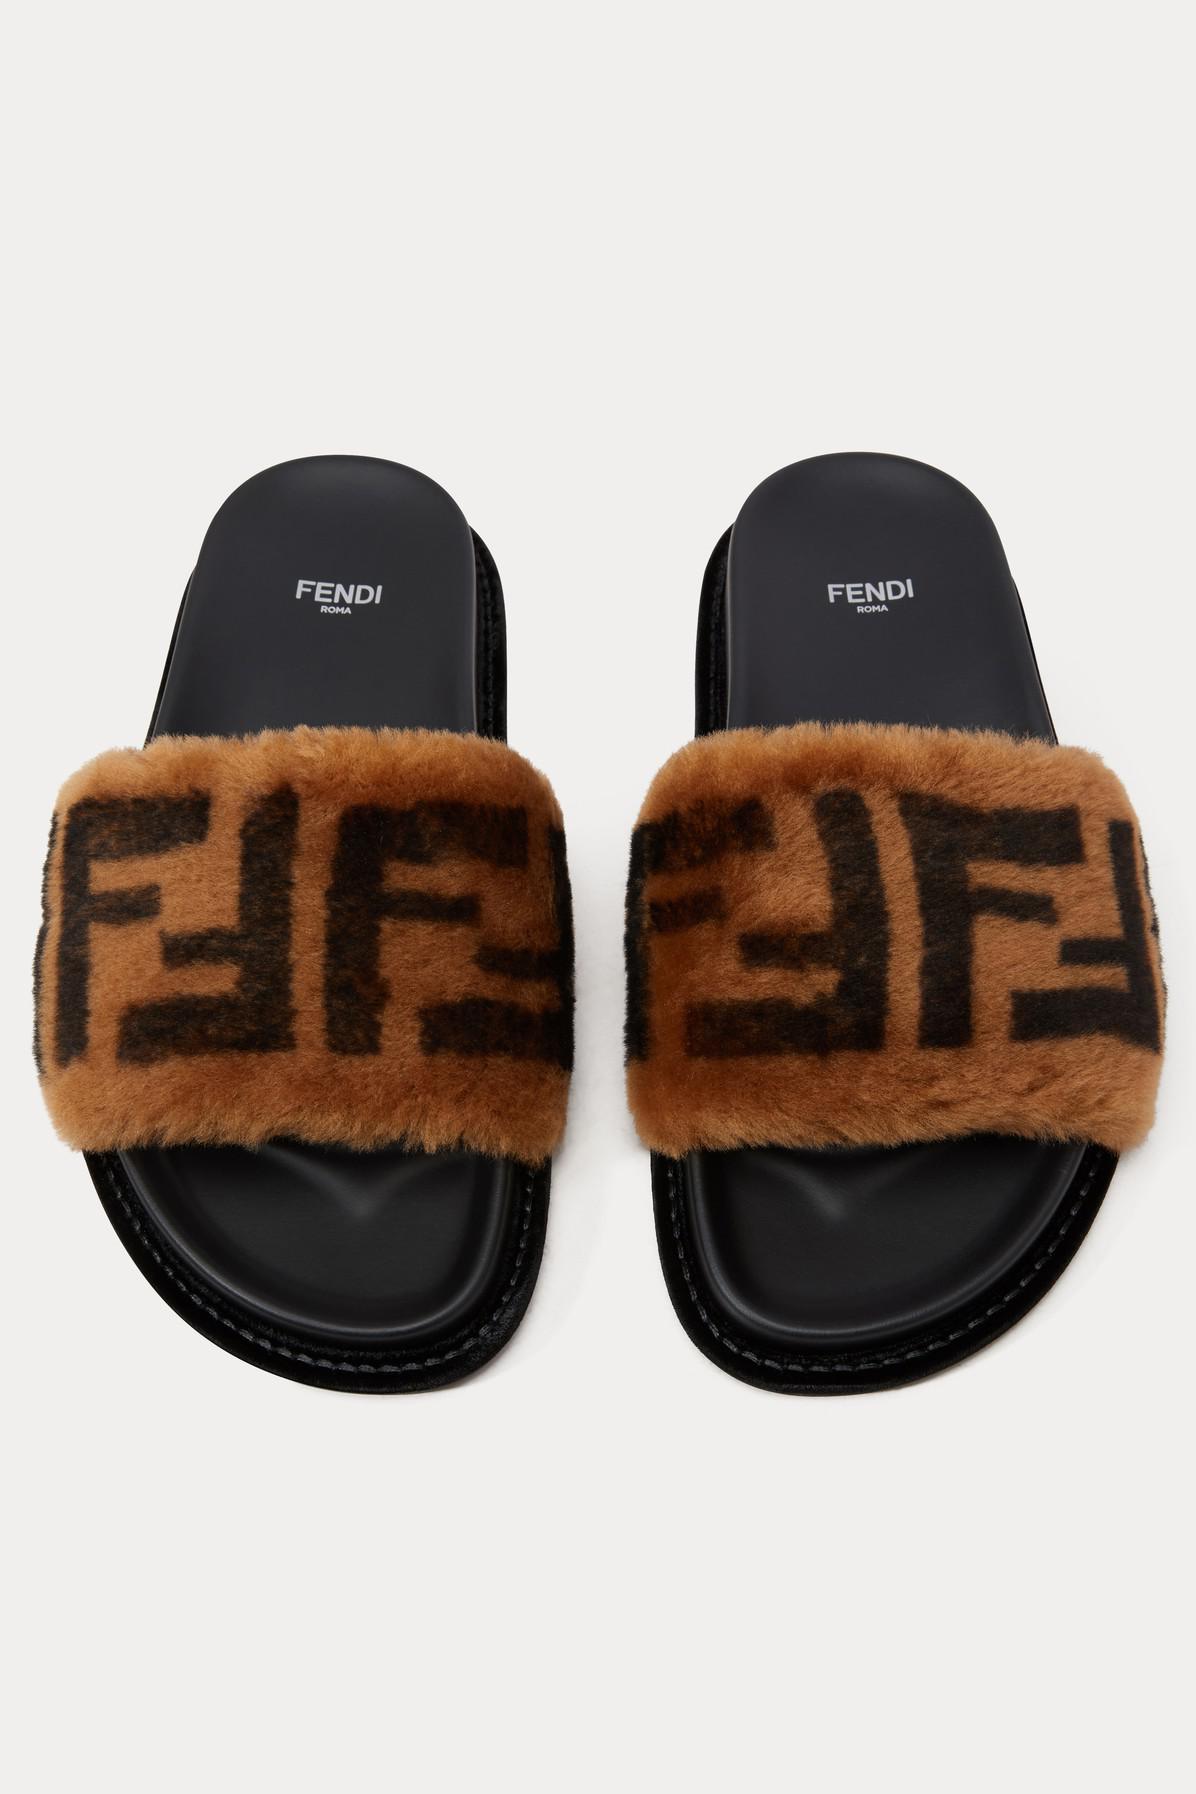 Fendi Flops Online Hotsell, UP TO 54% OFF | www.investigaciondemercados.es